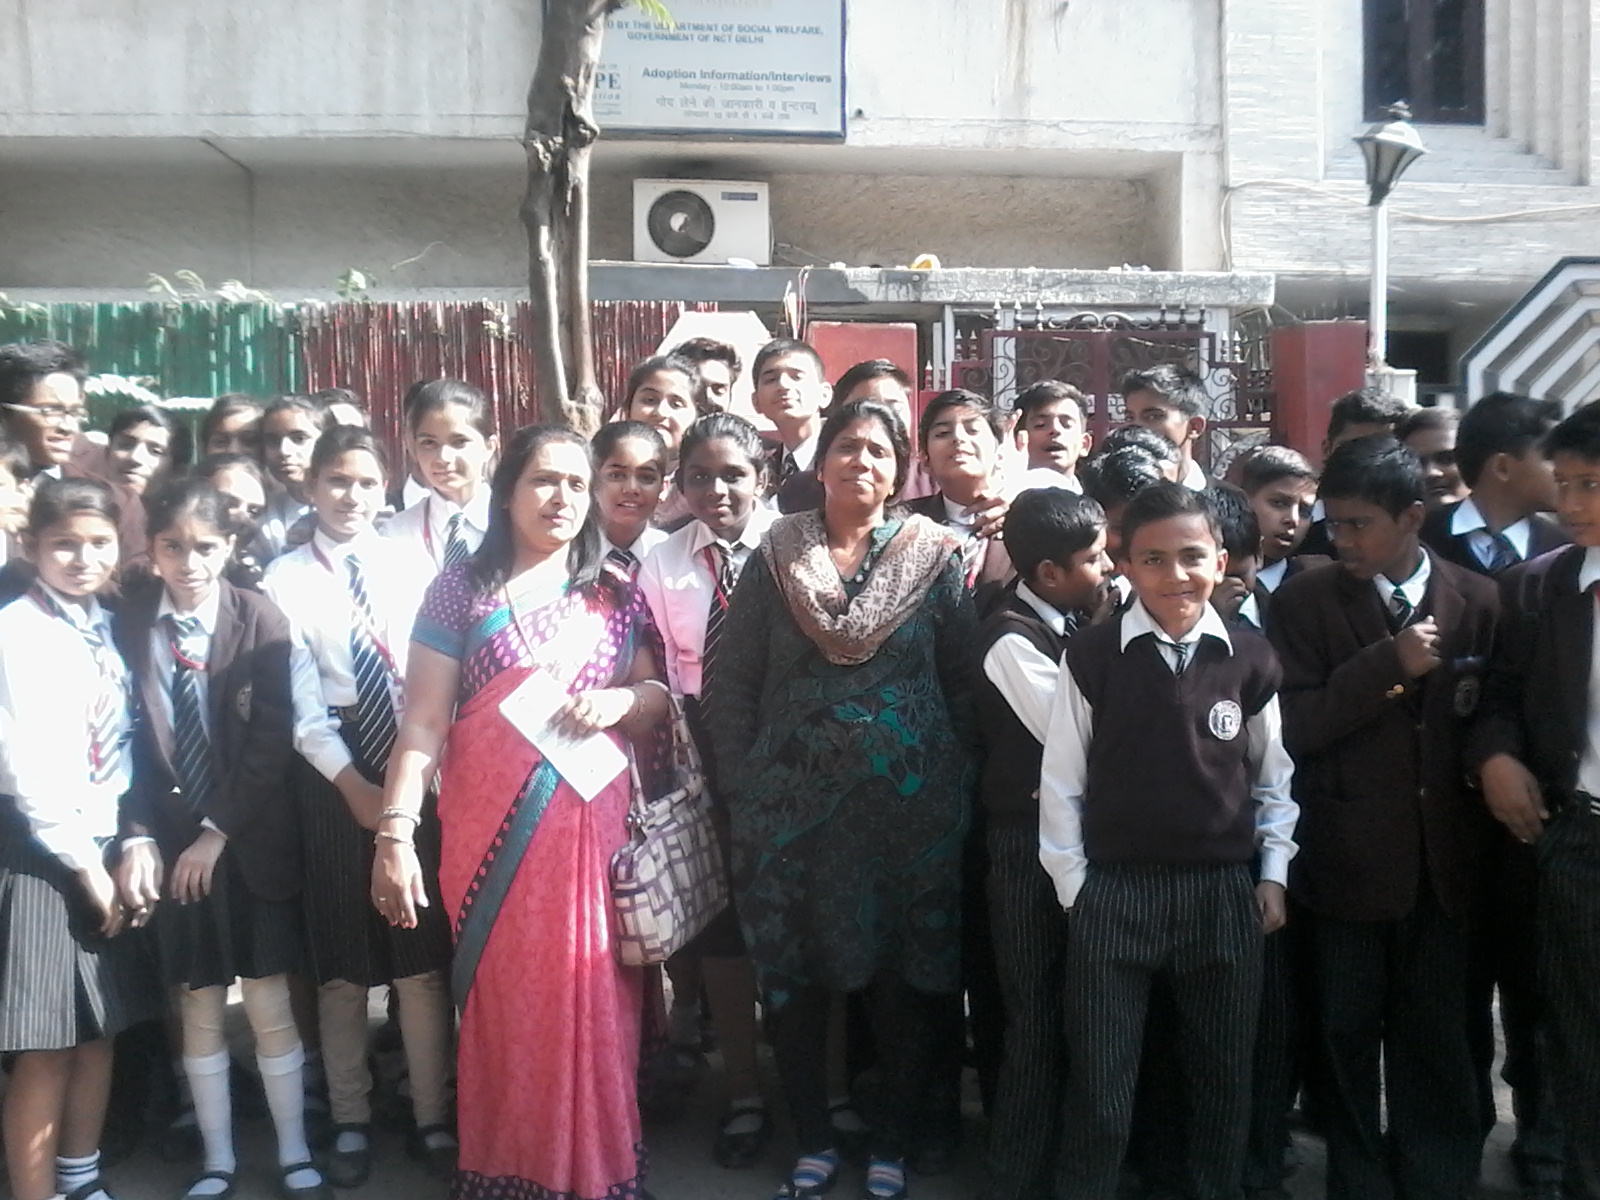 VISIT TO ORPHANAGE BY SWAS CLUB ON 2-12-2014